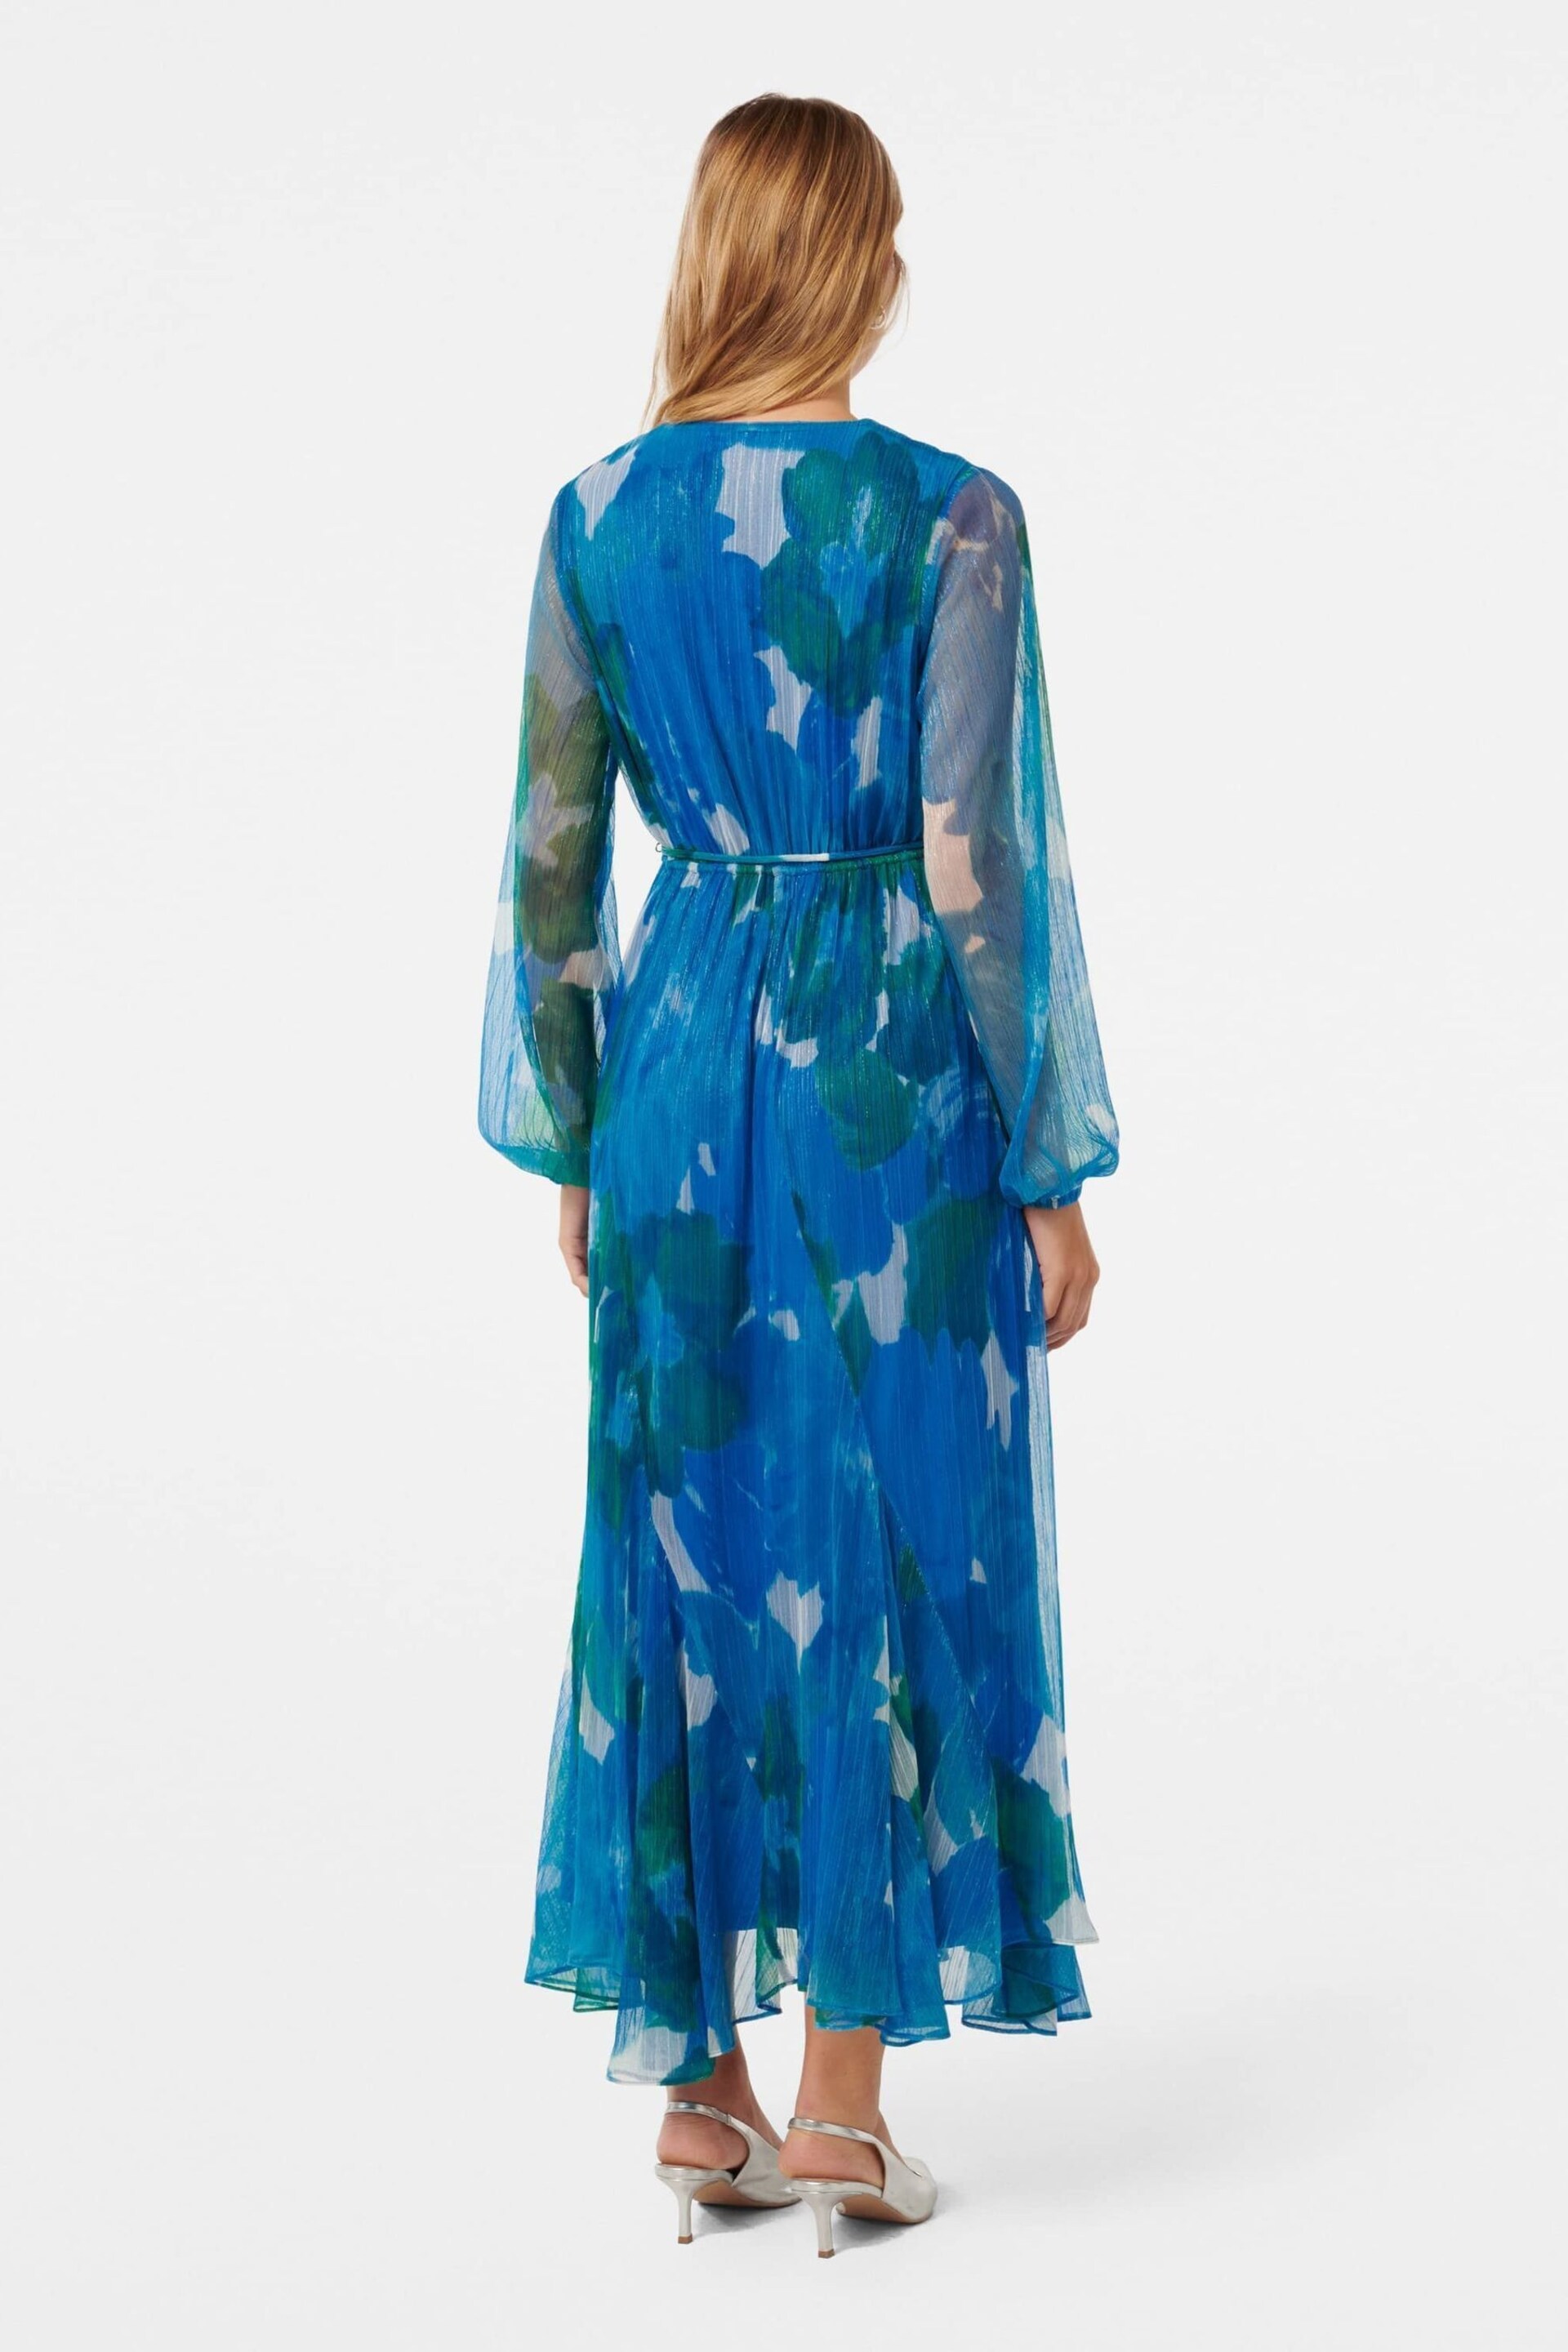 Forever New Blue August Printed Plisse Midi Dress - Image 4 of 4